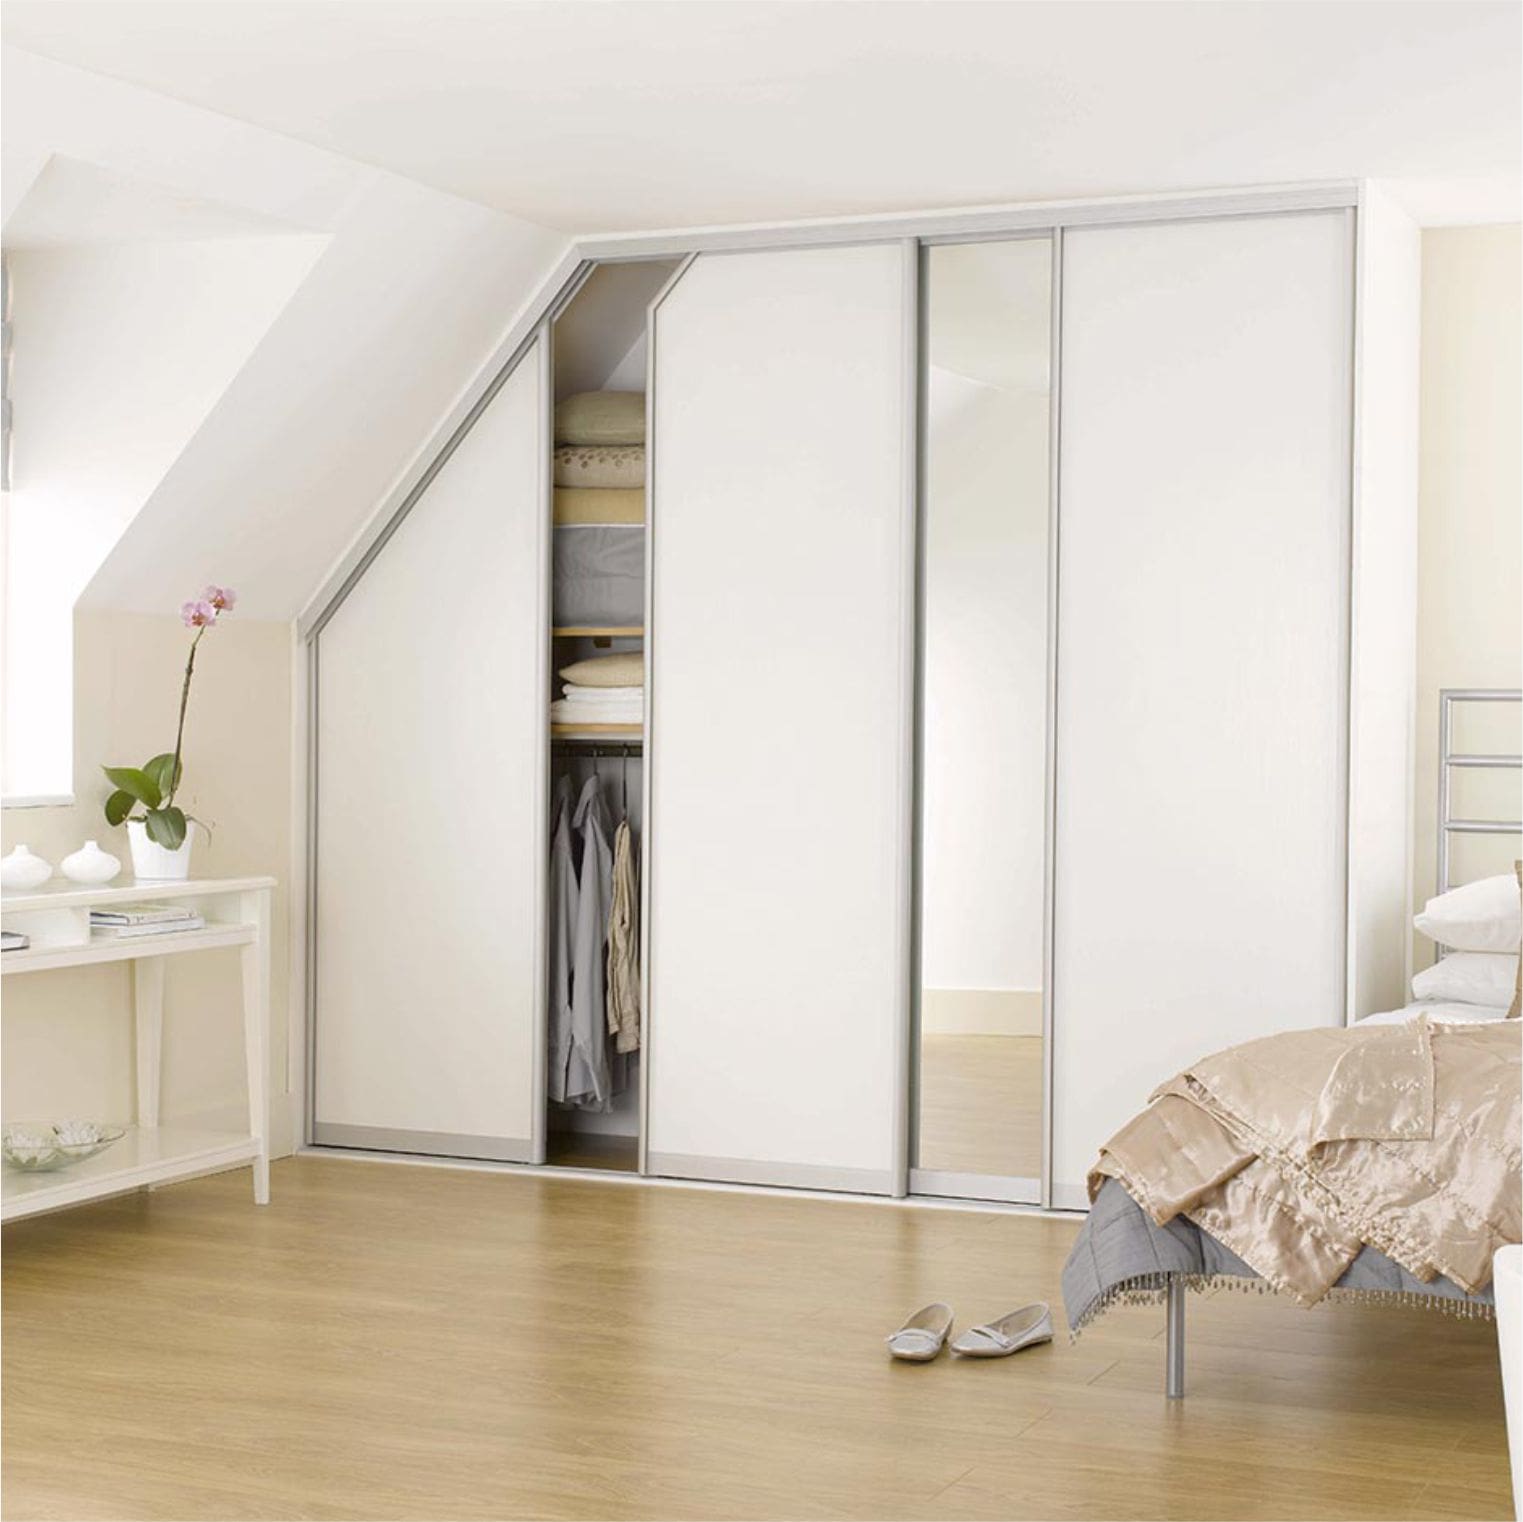 aristo india sliding wardrobes are made to fit any room structure